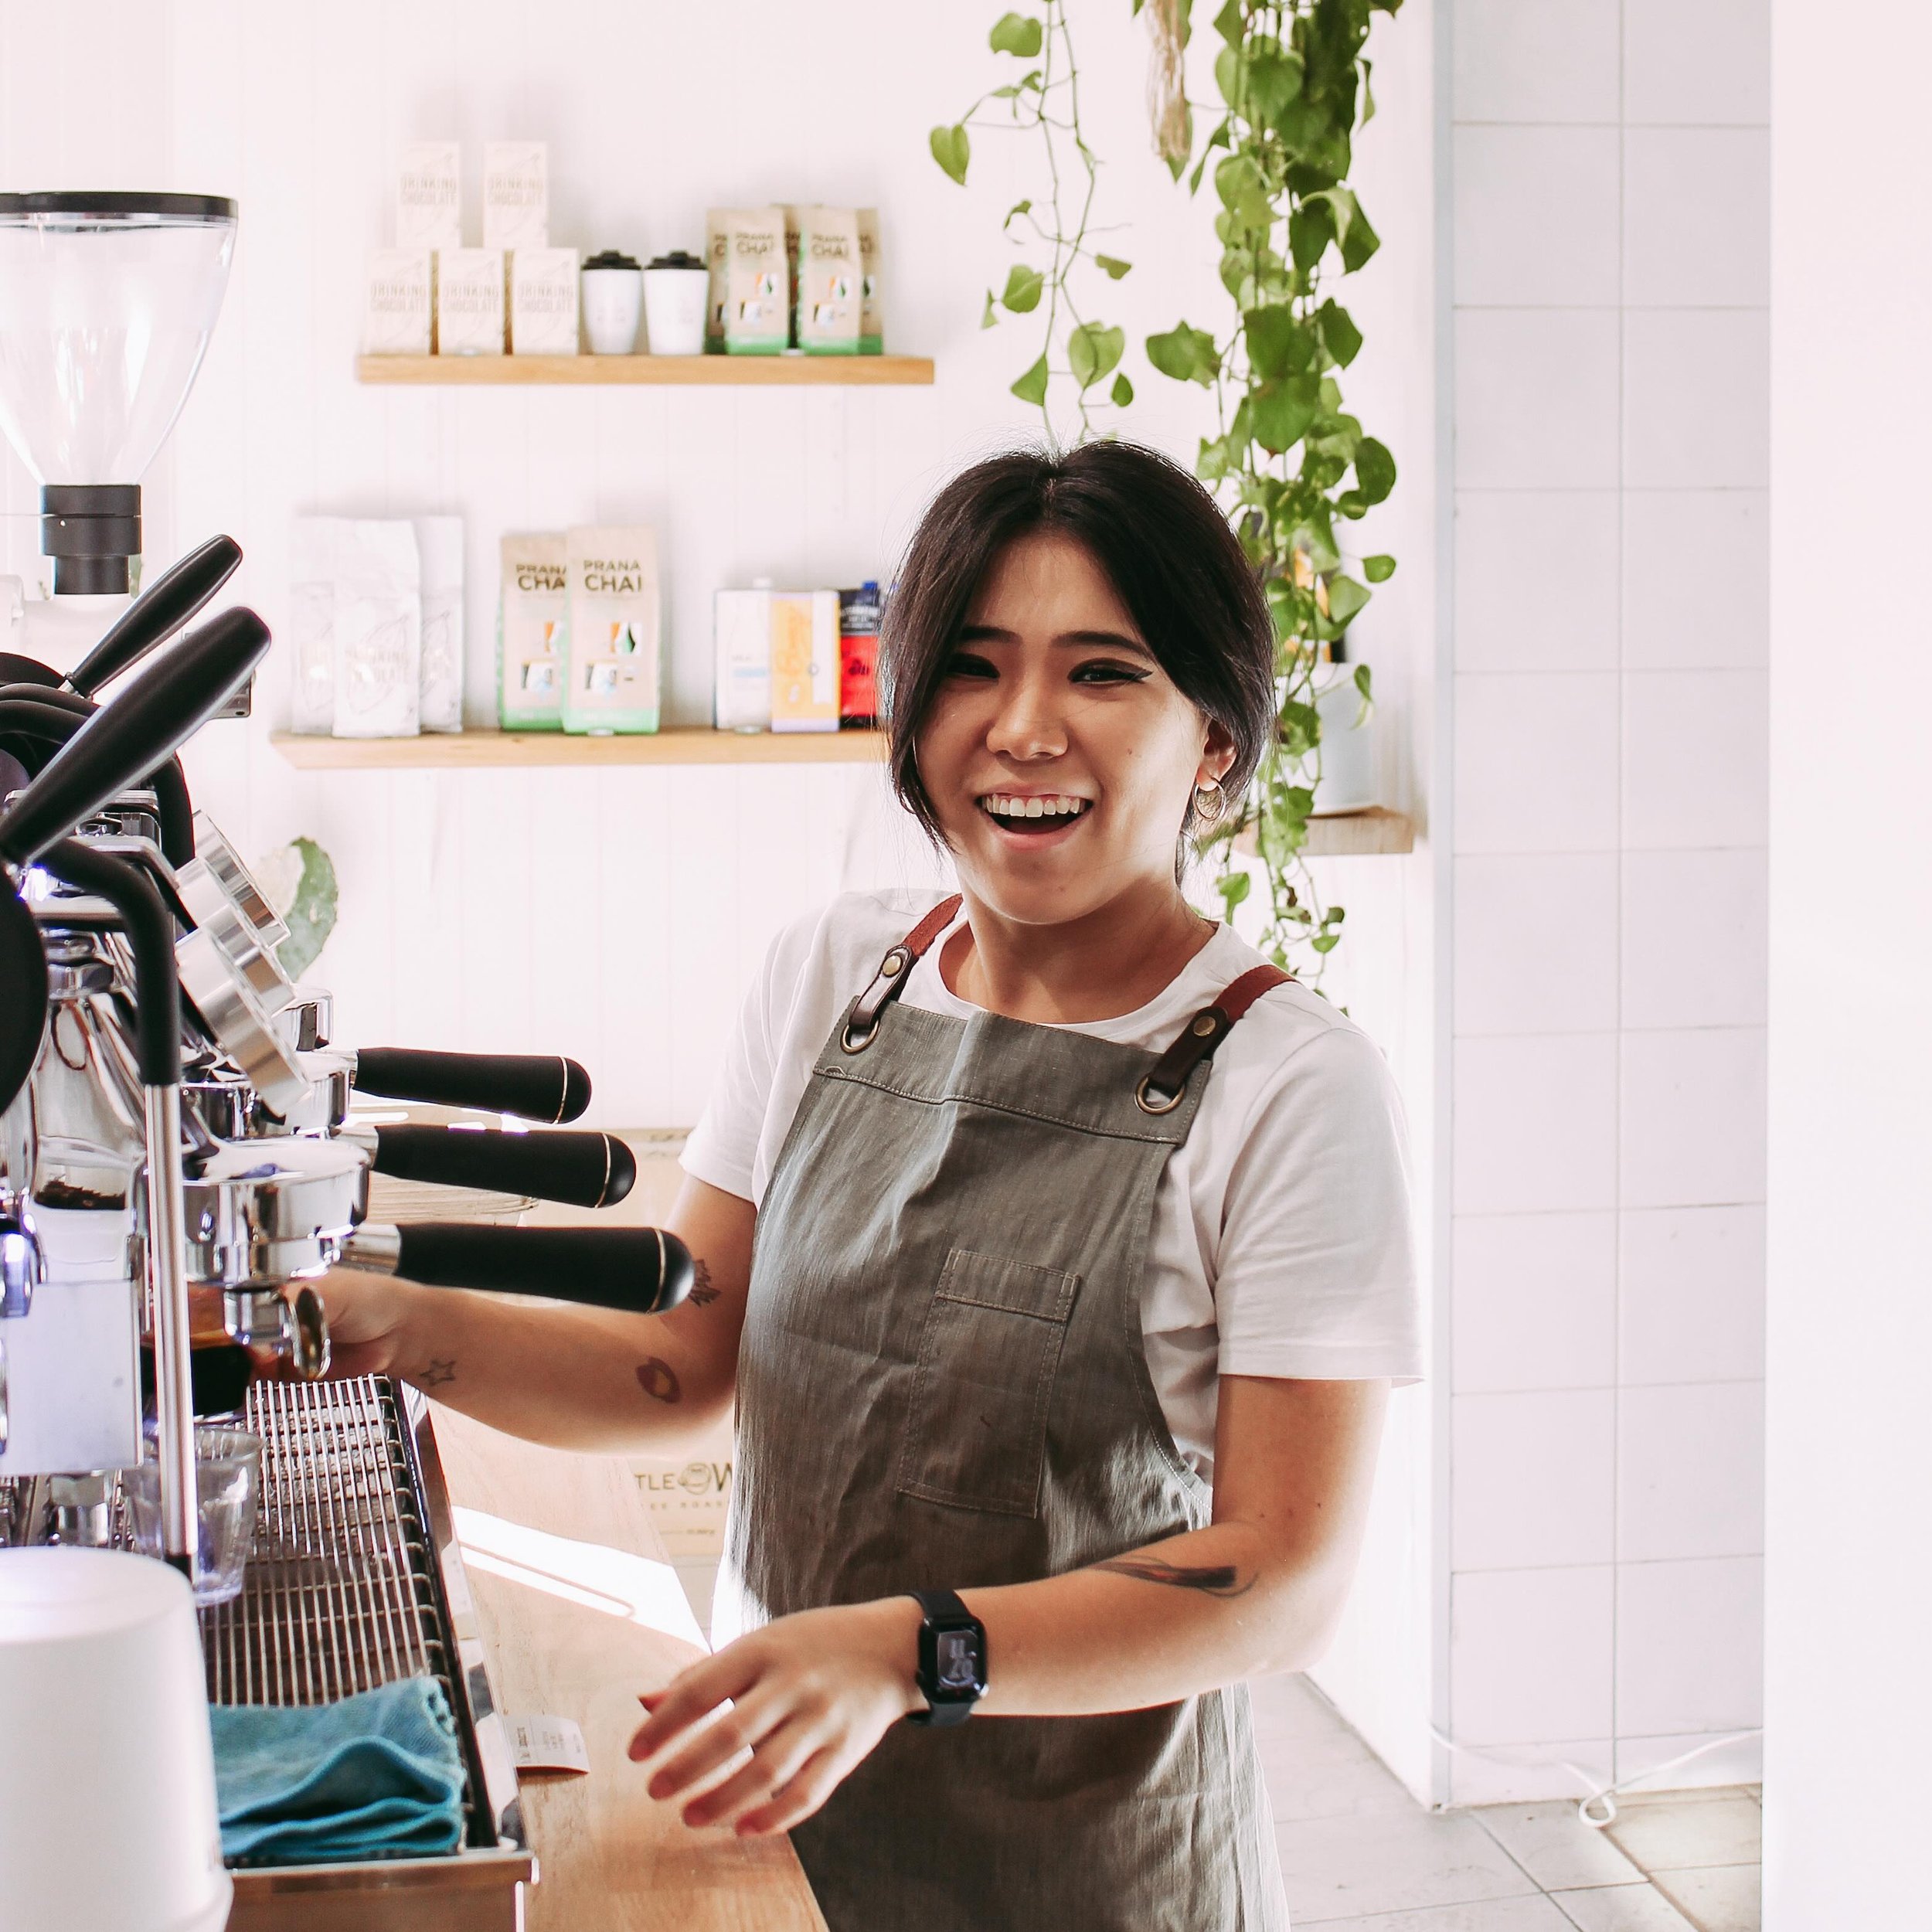 Say hello to Chea! 😊 You&rsquo;ll find her behind the machine most days pumping out some of the best coffee going around! We are so lucky to have her as part of the Haven team! ☕️✨

📸 @em_adventures2